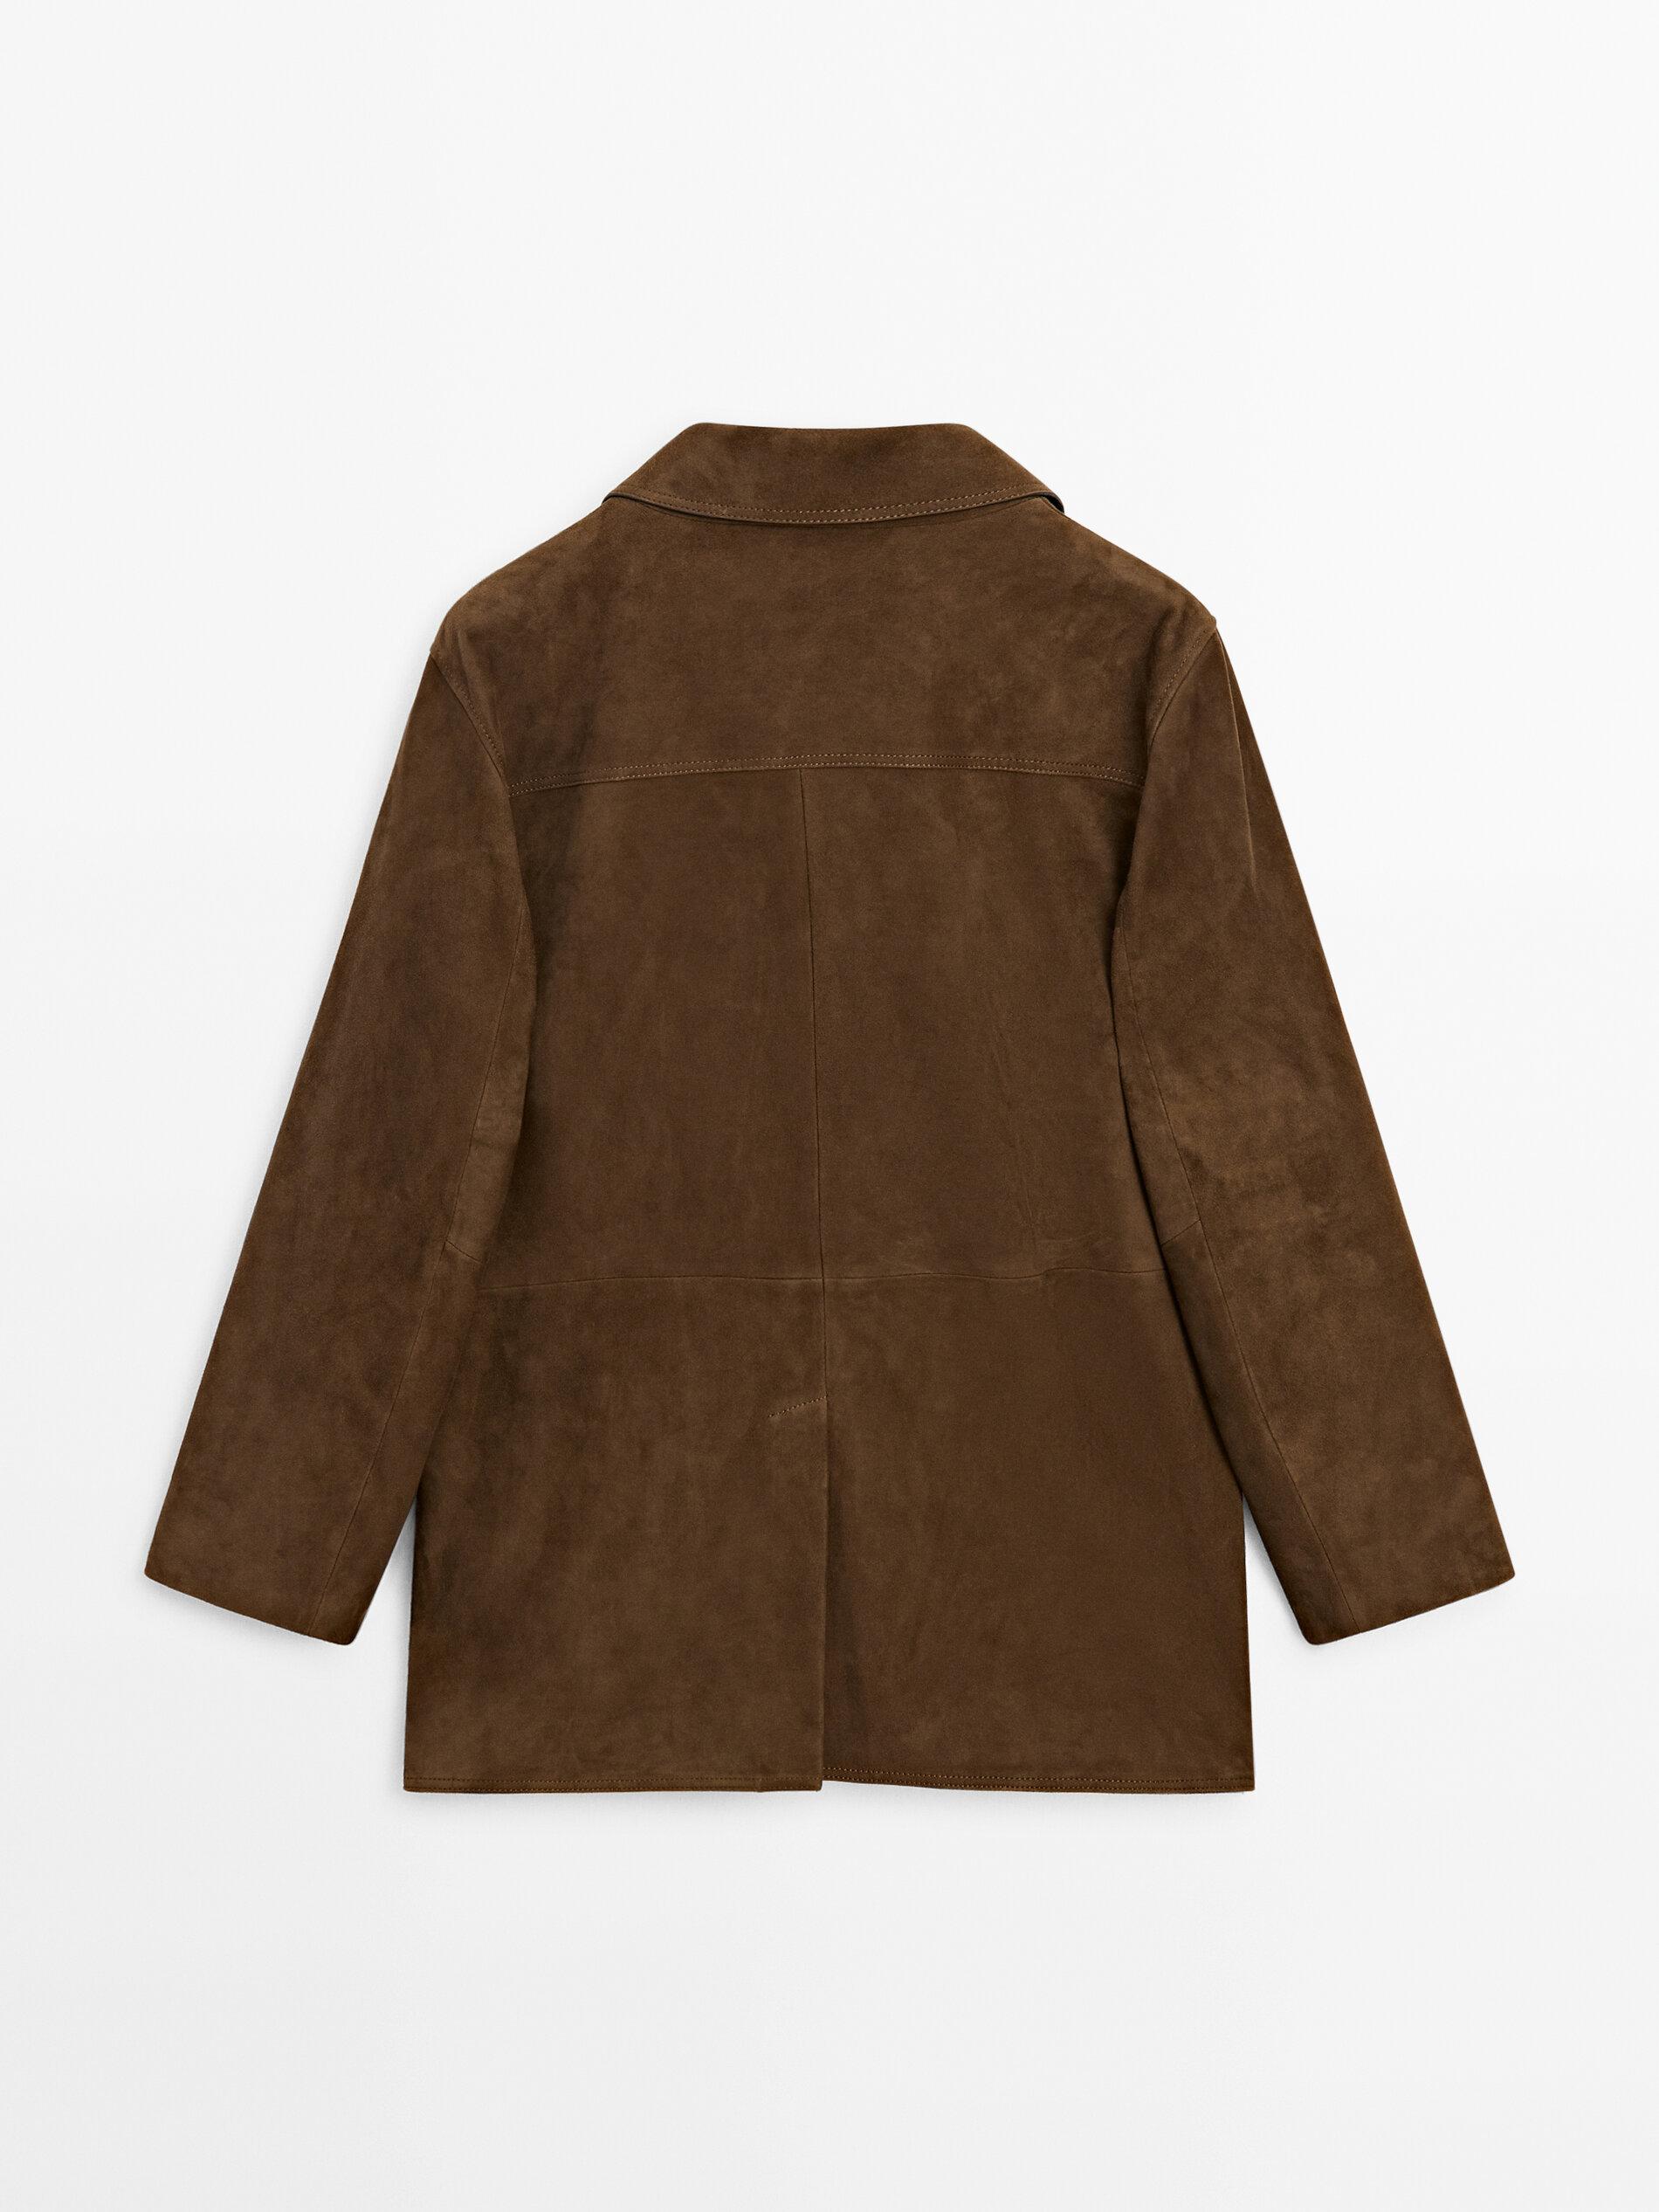 MASSIMO DUTTI Suede Leather Blazer in Brown | Lyst